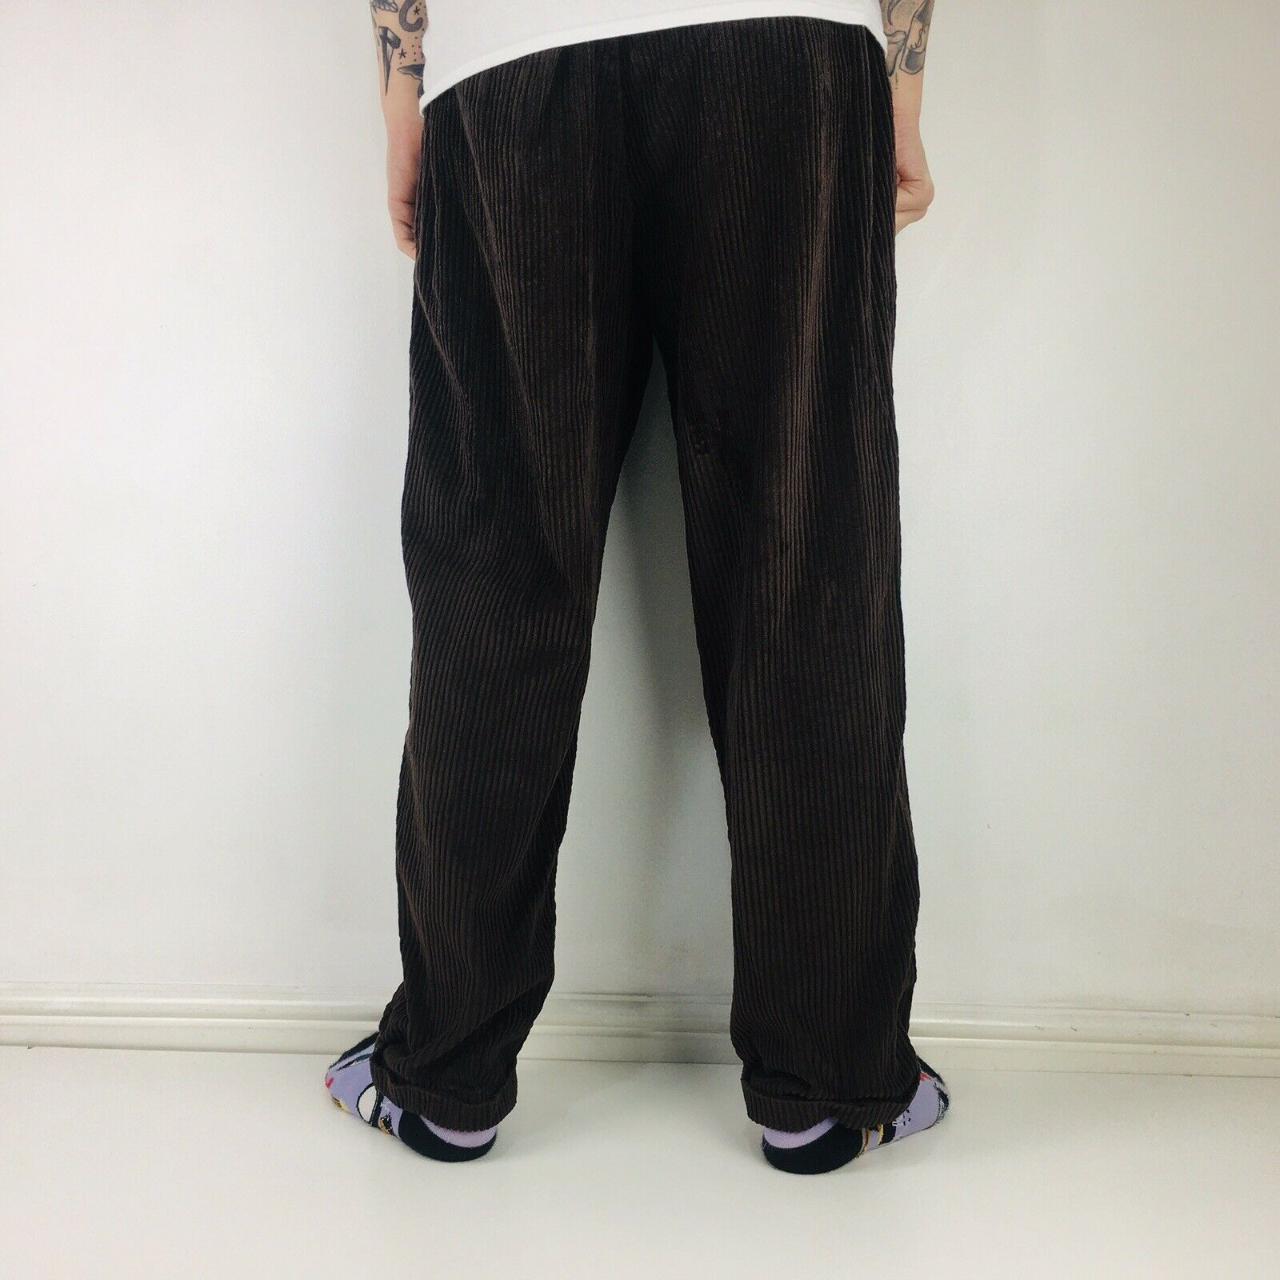 Product Image 3 - Vintage Corduroy Trousers 

Brand: Clubroom

Cuffed

Great